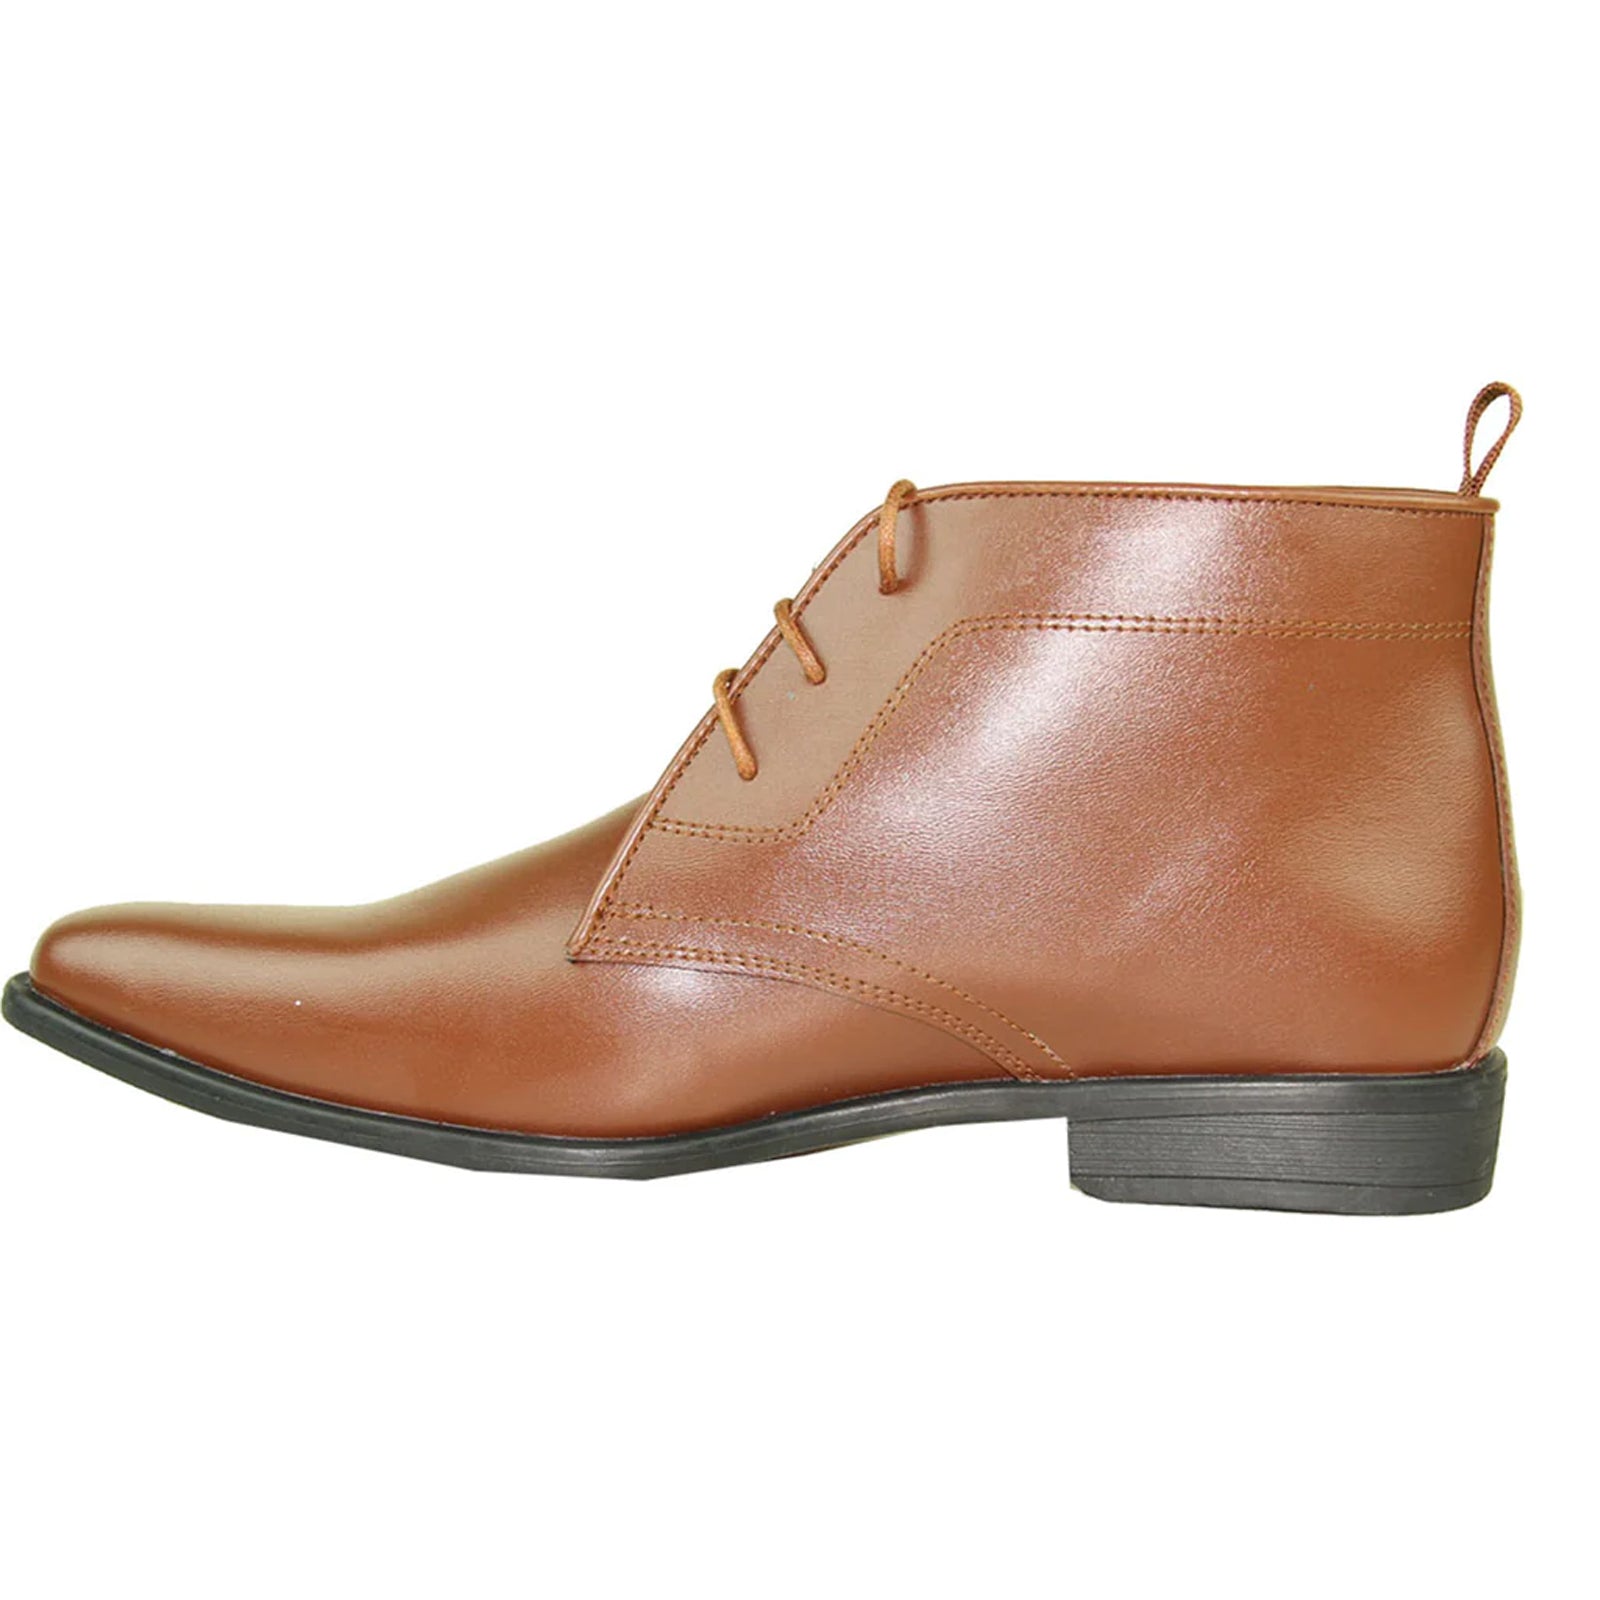 "Brown Men's Formal Ankle Boot for Prom & Wedding Events"